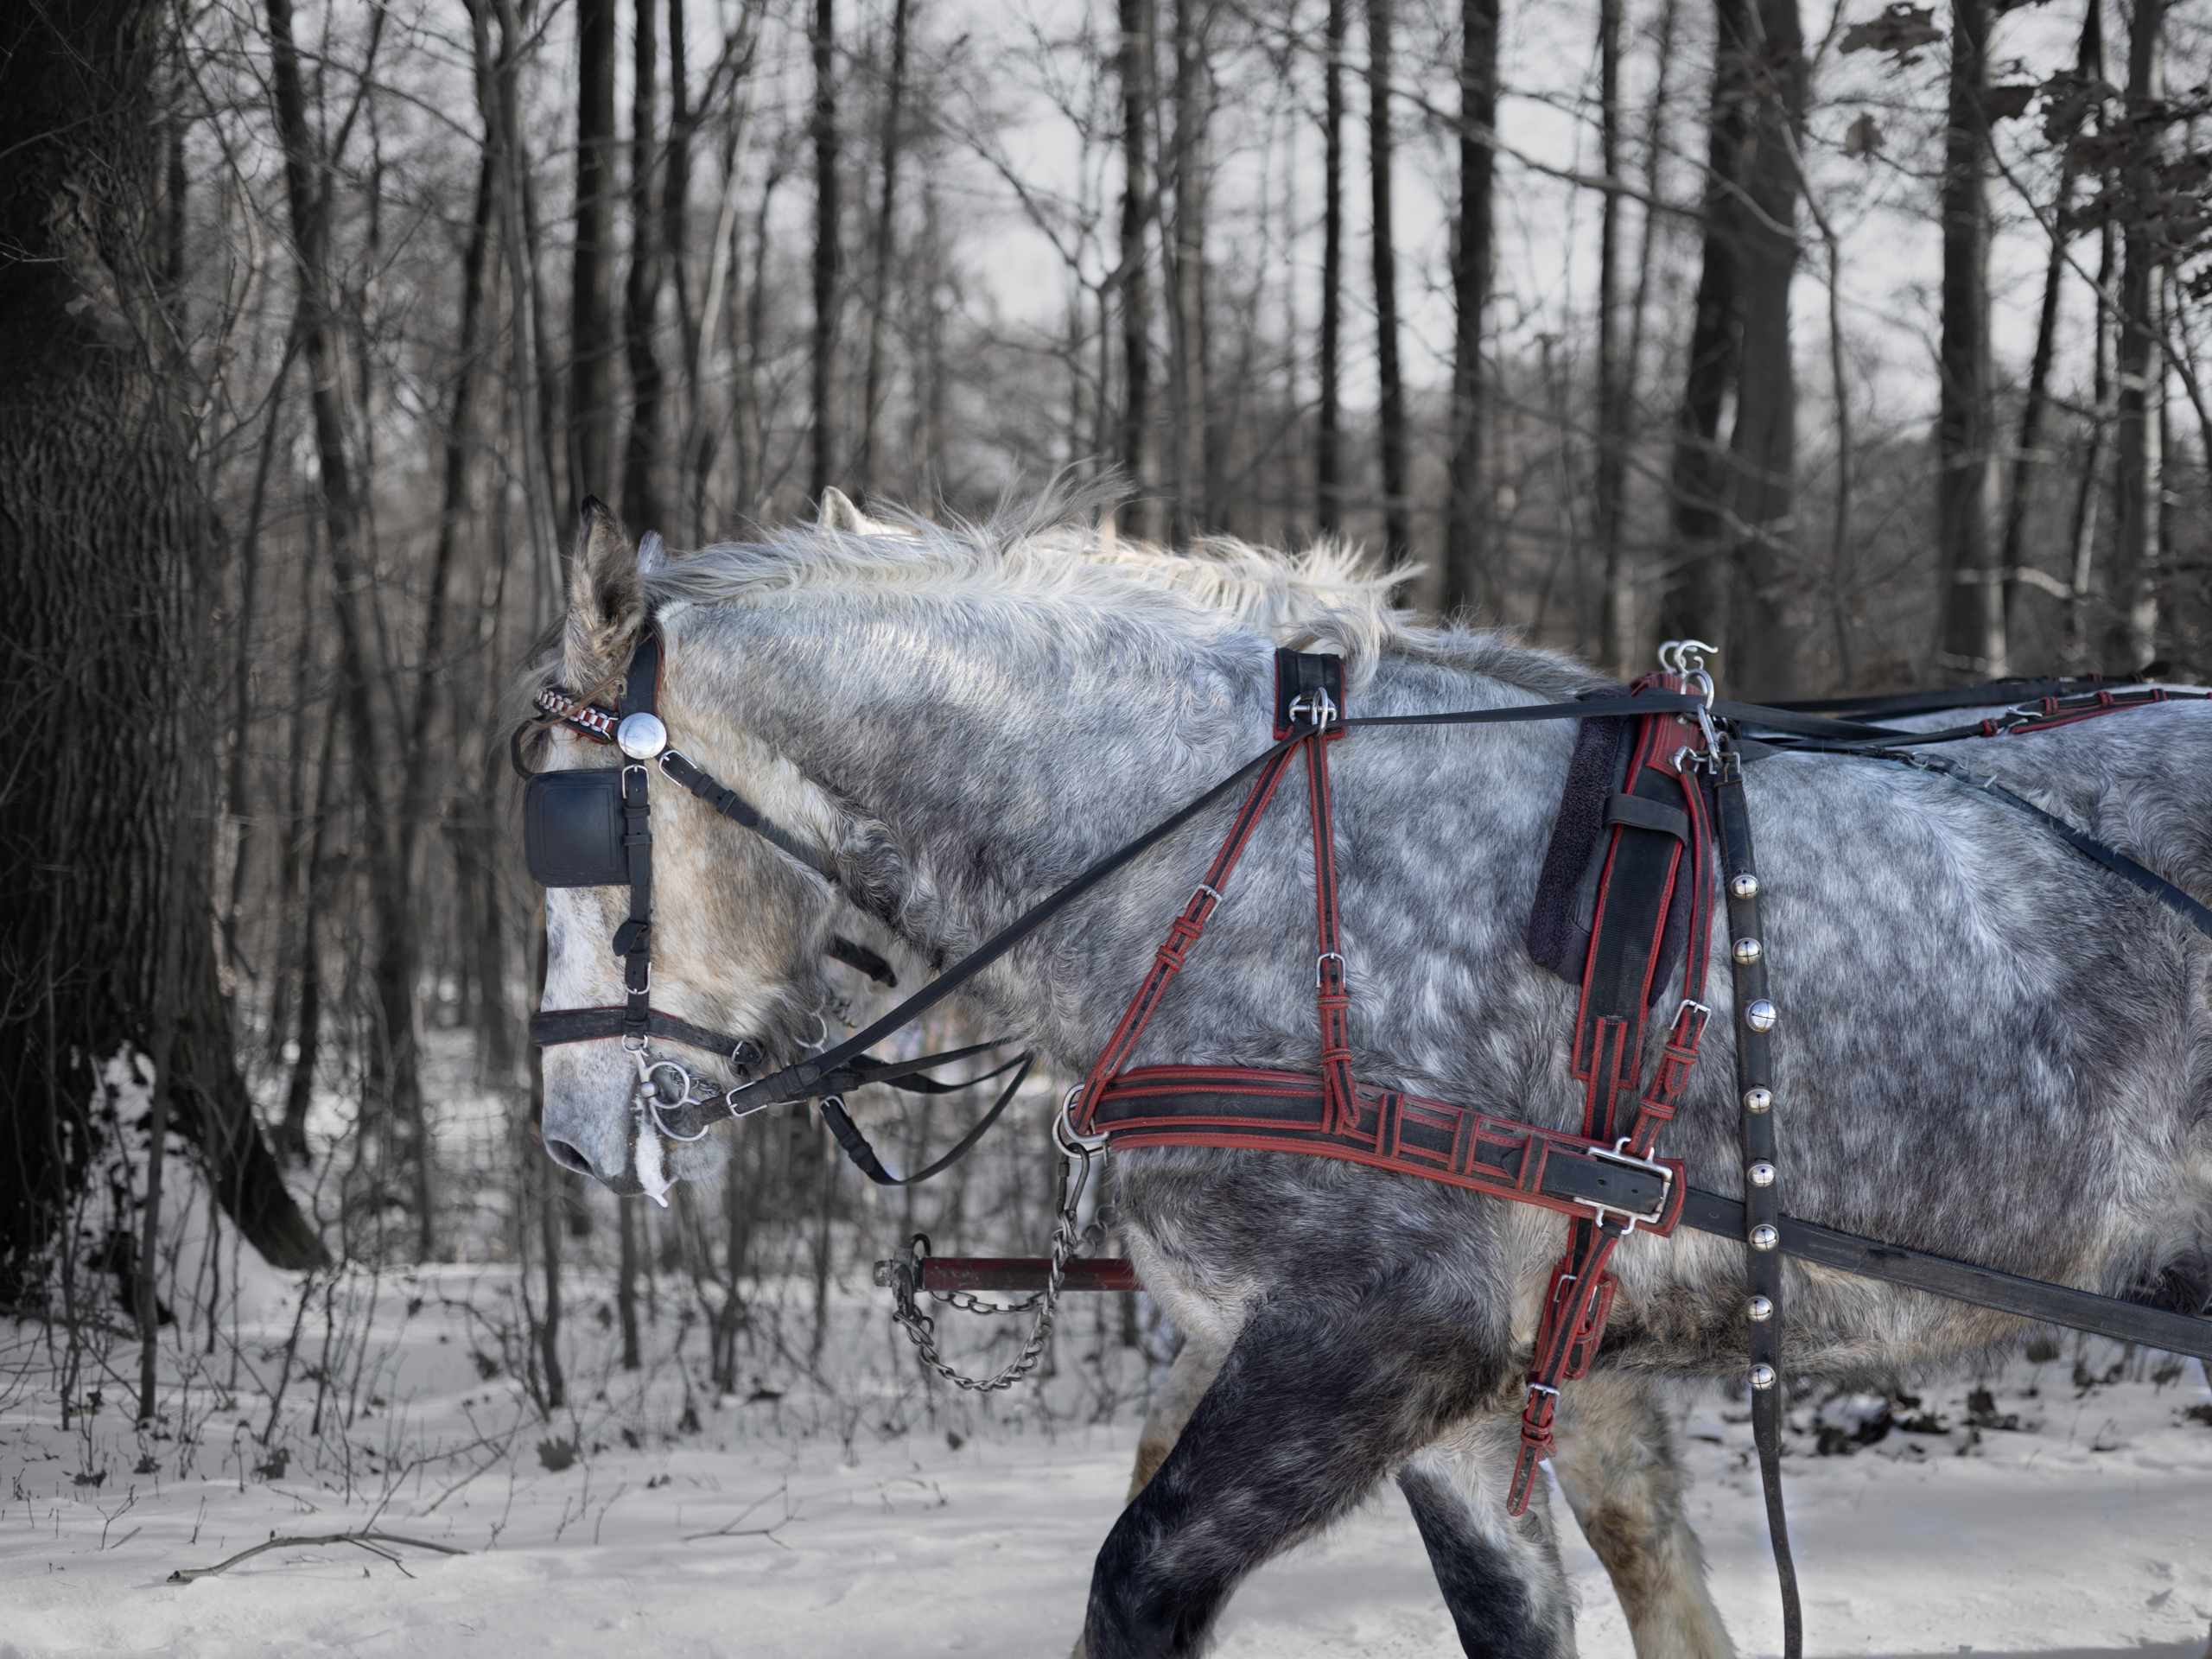 white and gray horse walking in the snow in the woods